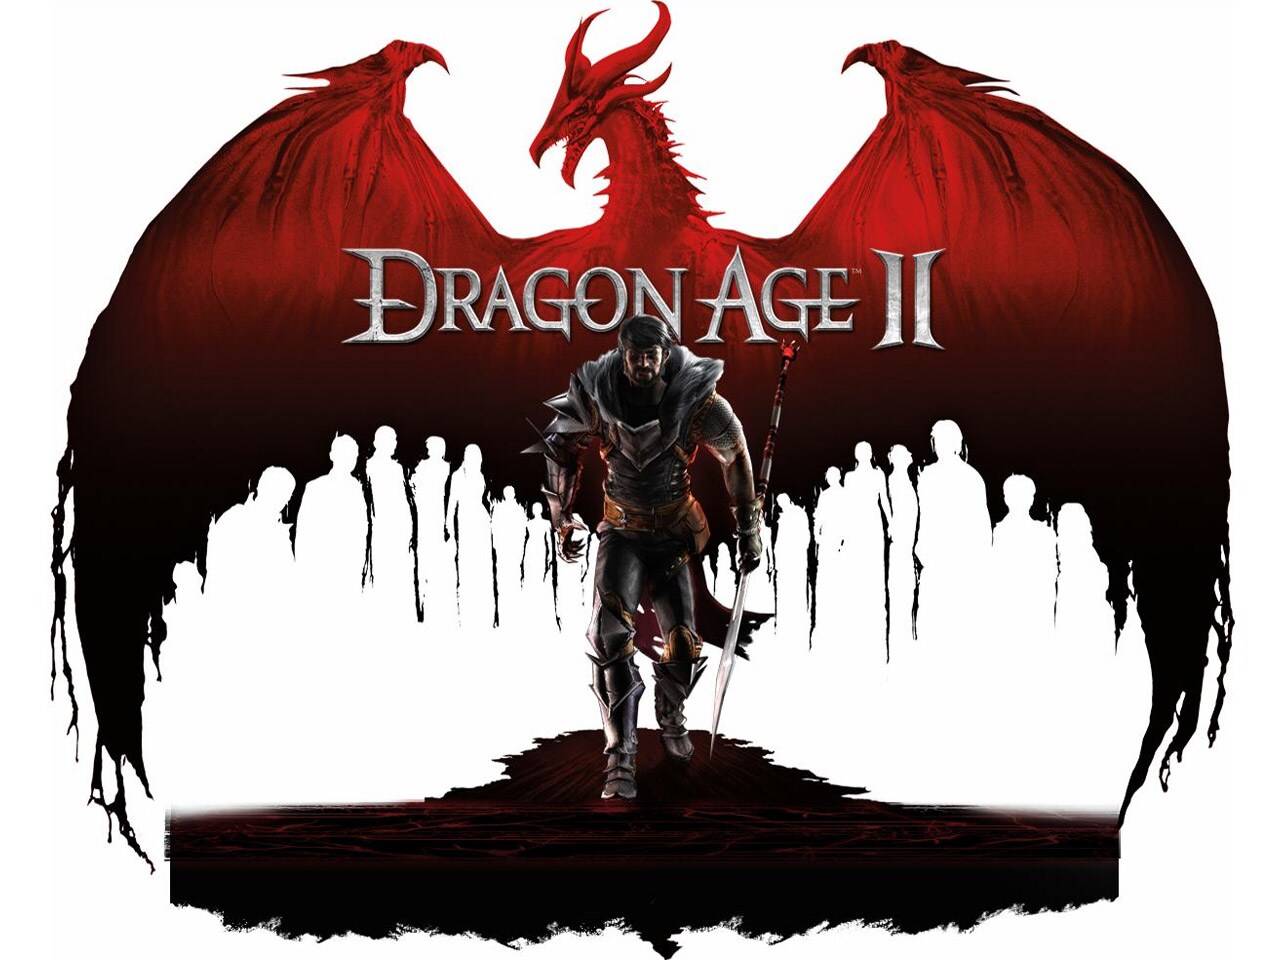 Dragon Age II PC cheats, trainers, guides and walkthroughs